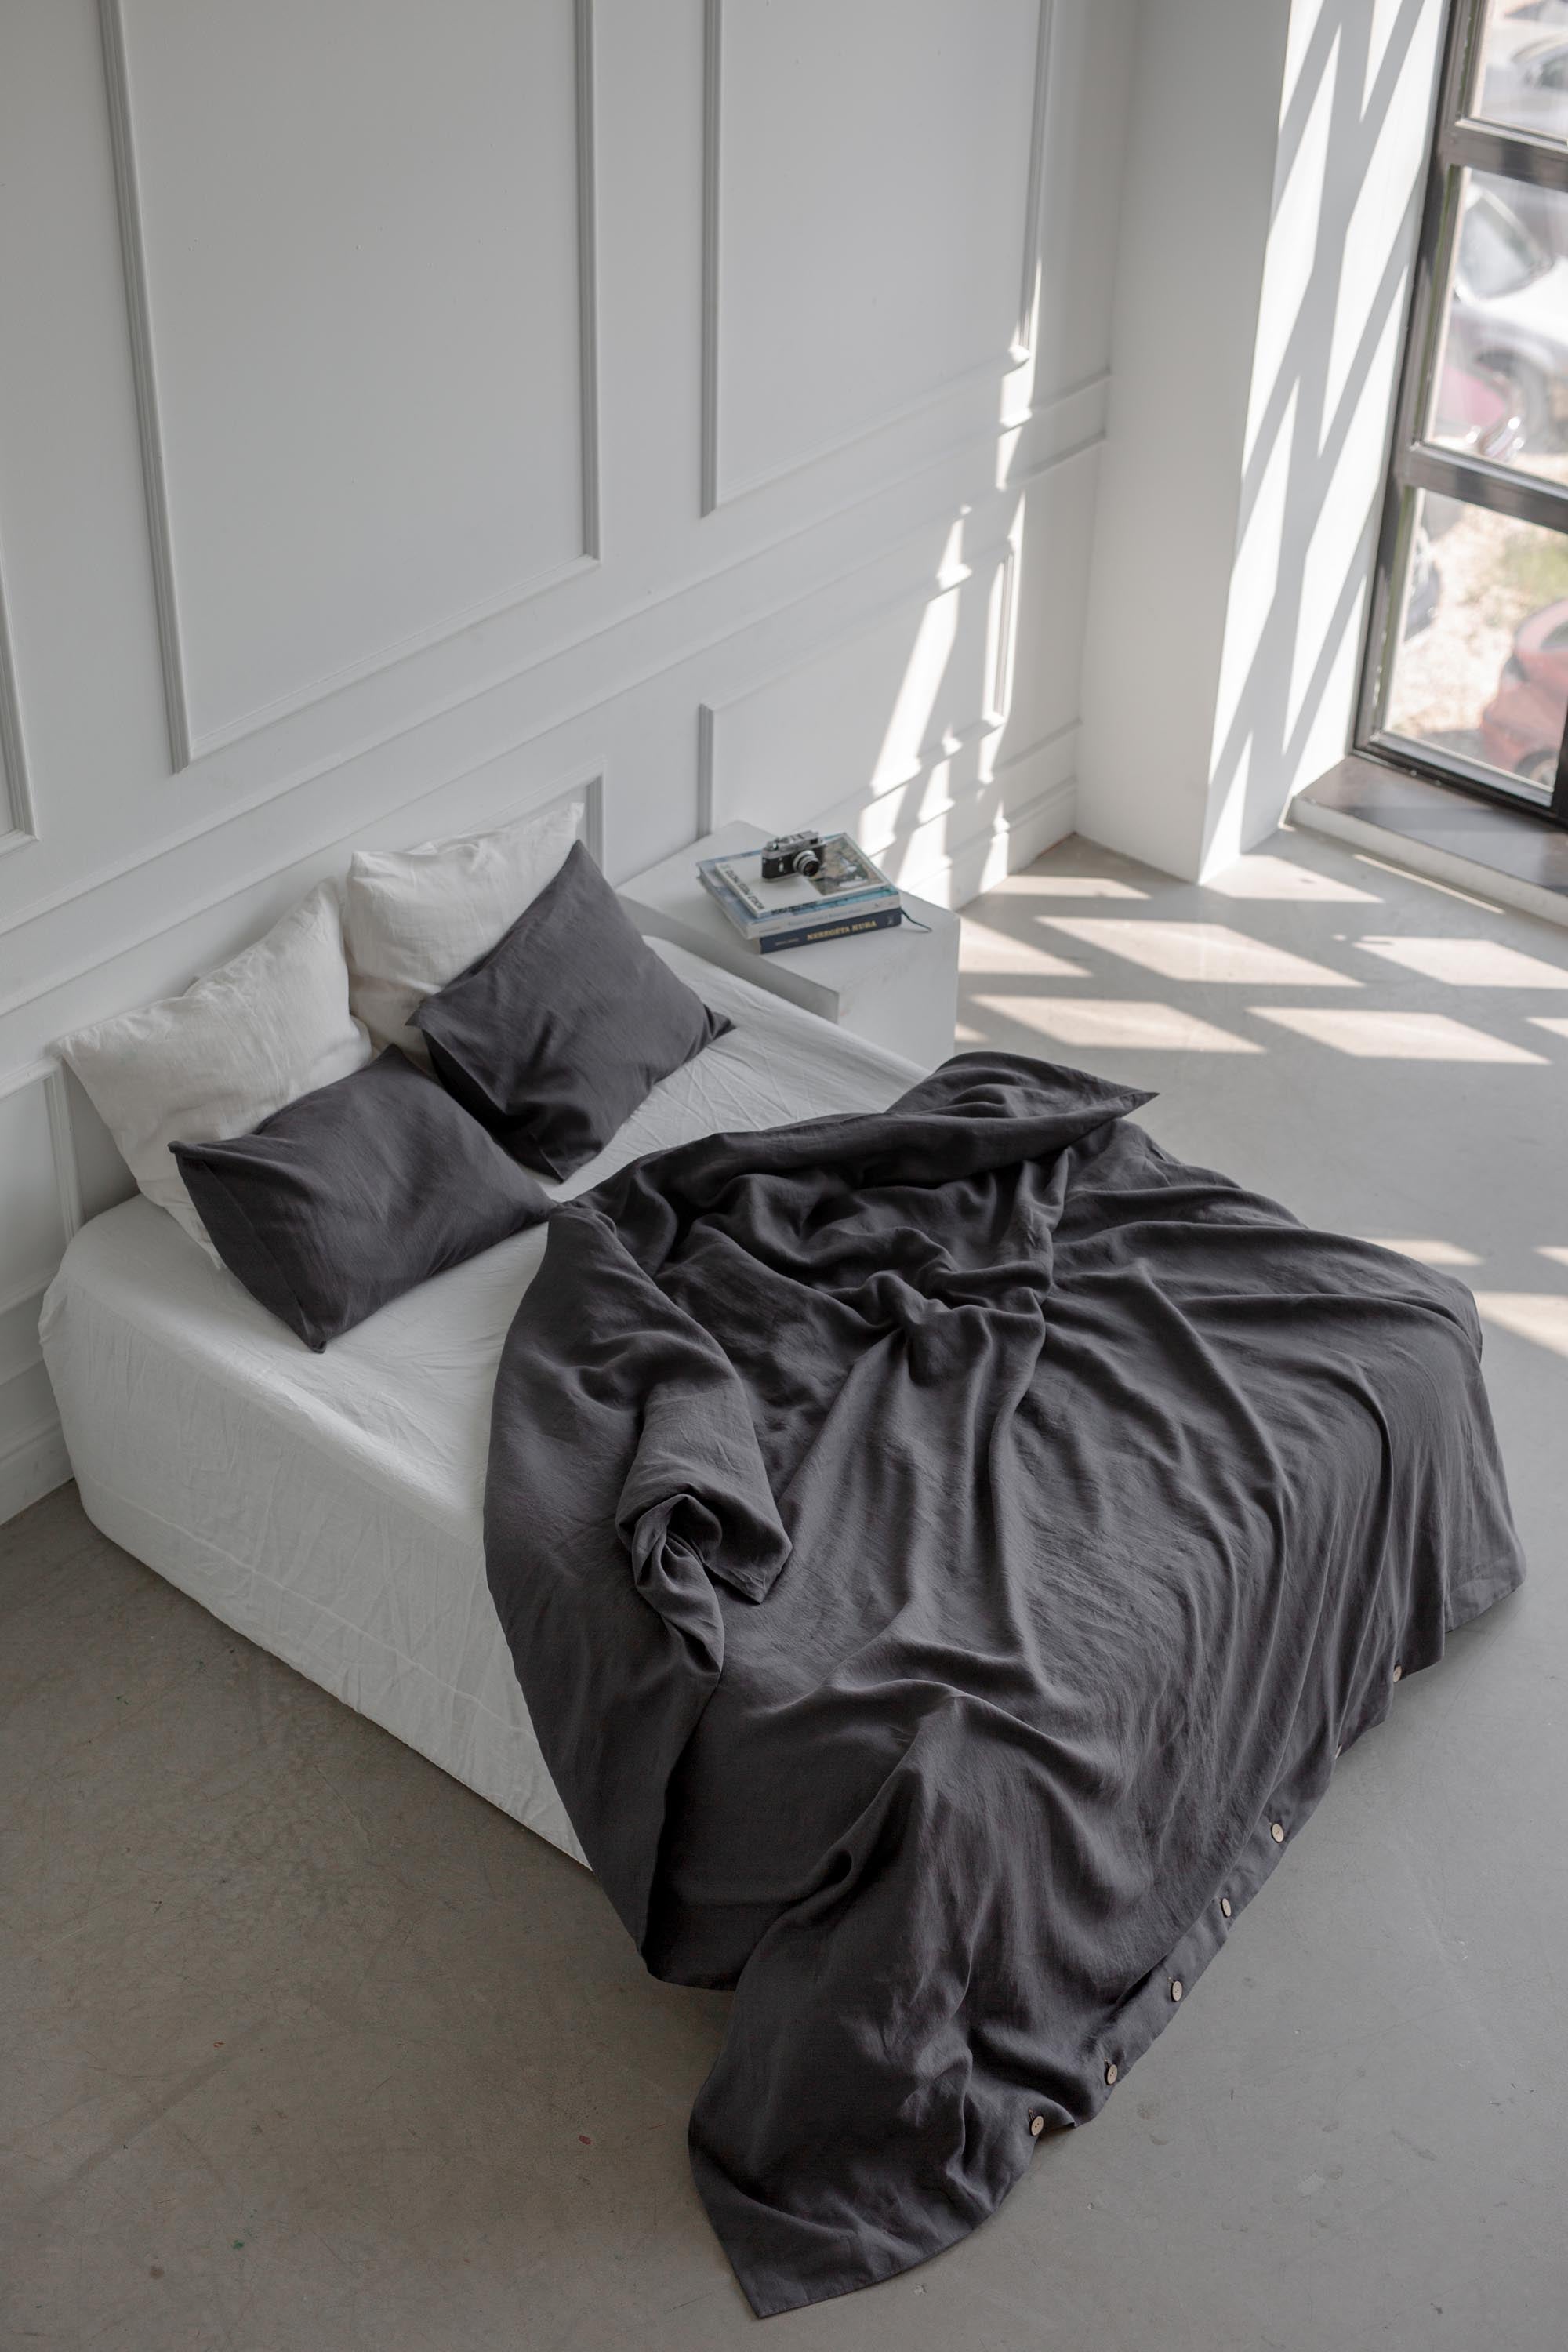 Undone Bed With Charcoal Linen Duvet Cover By AmourlInen